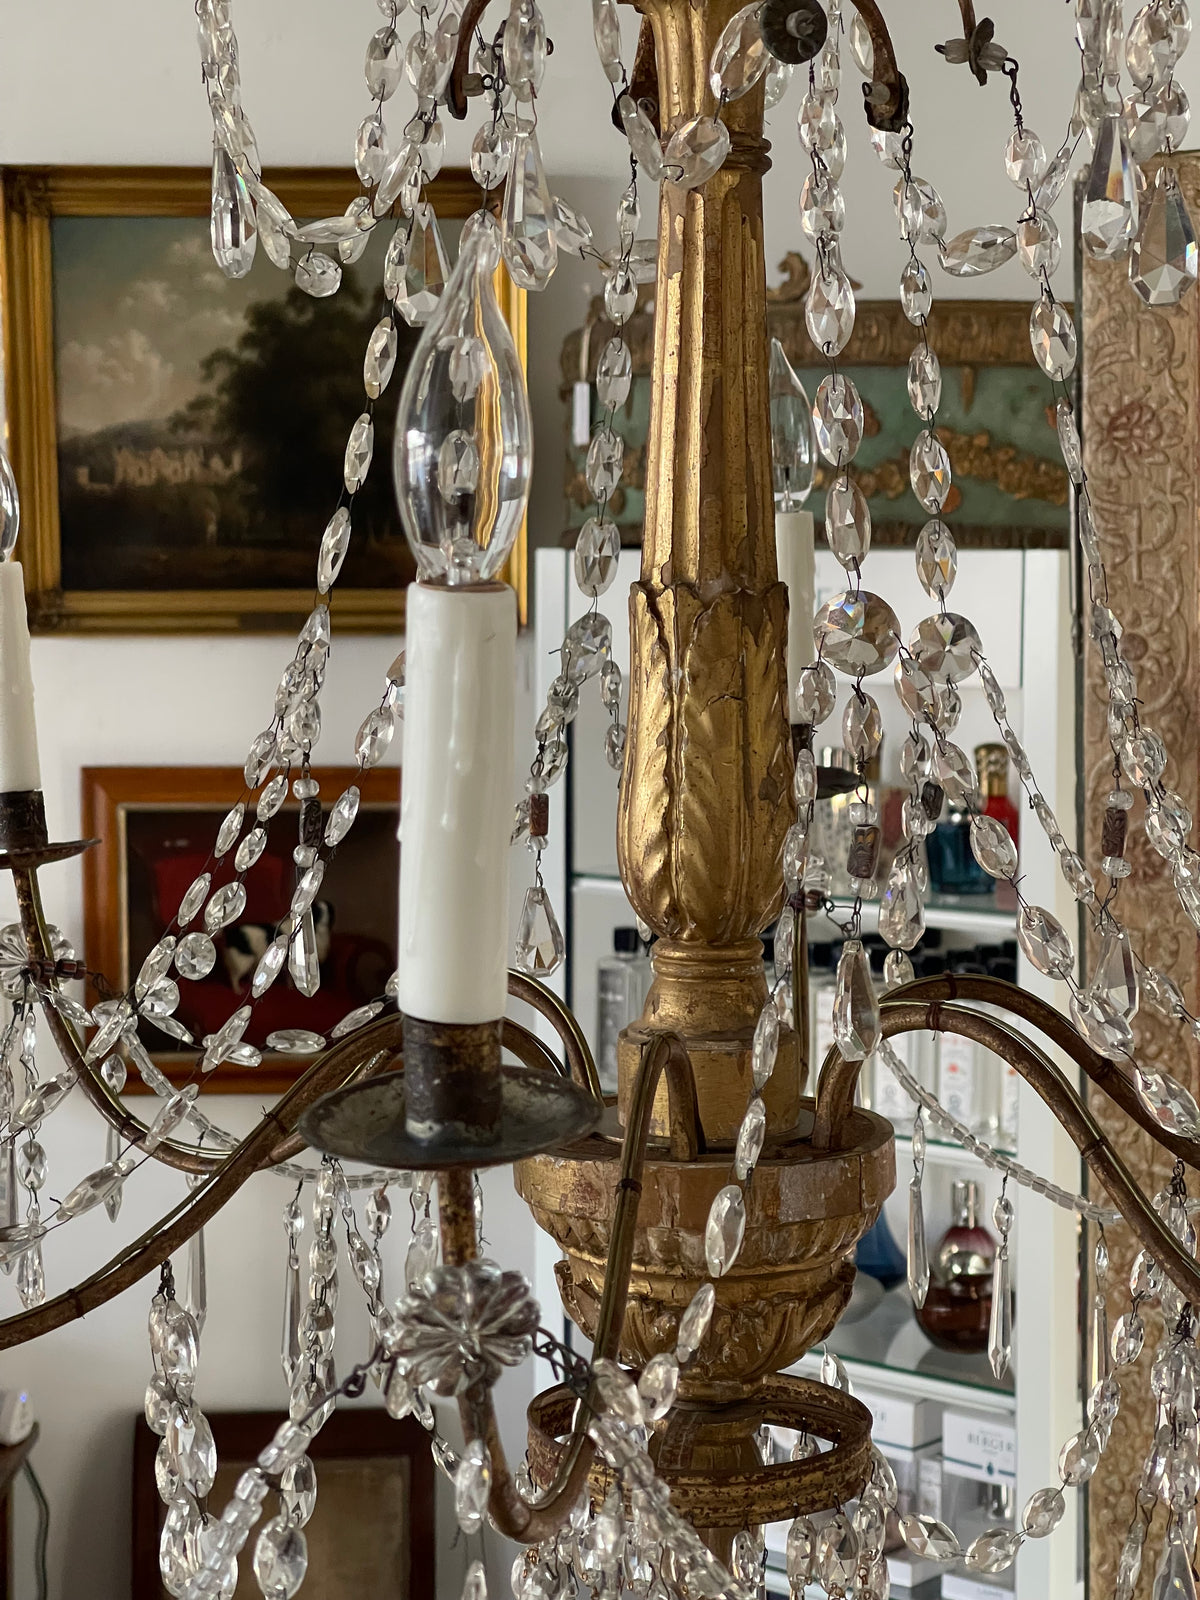 Late 18th Century-Early 19th Century Six Light Italian Genovese Chandelier